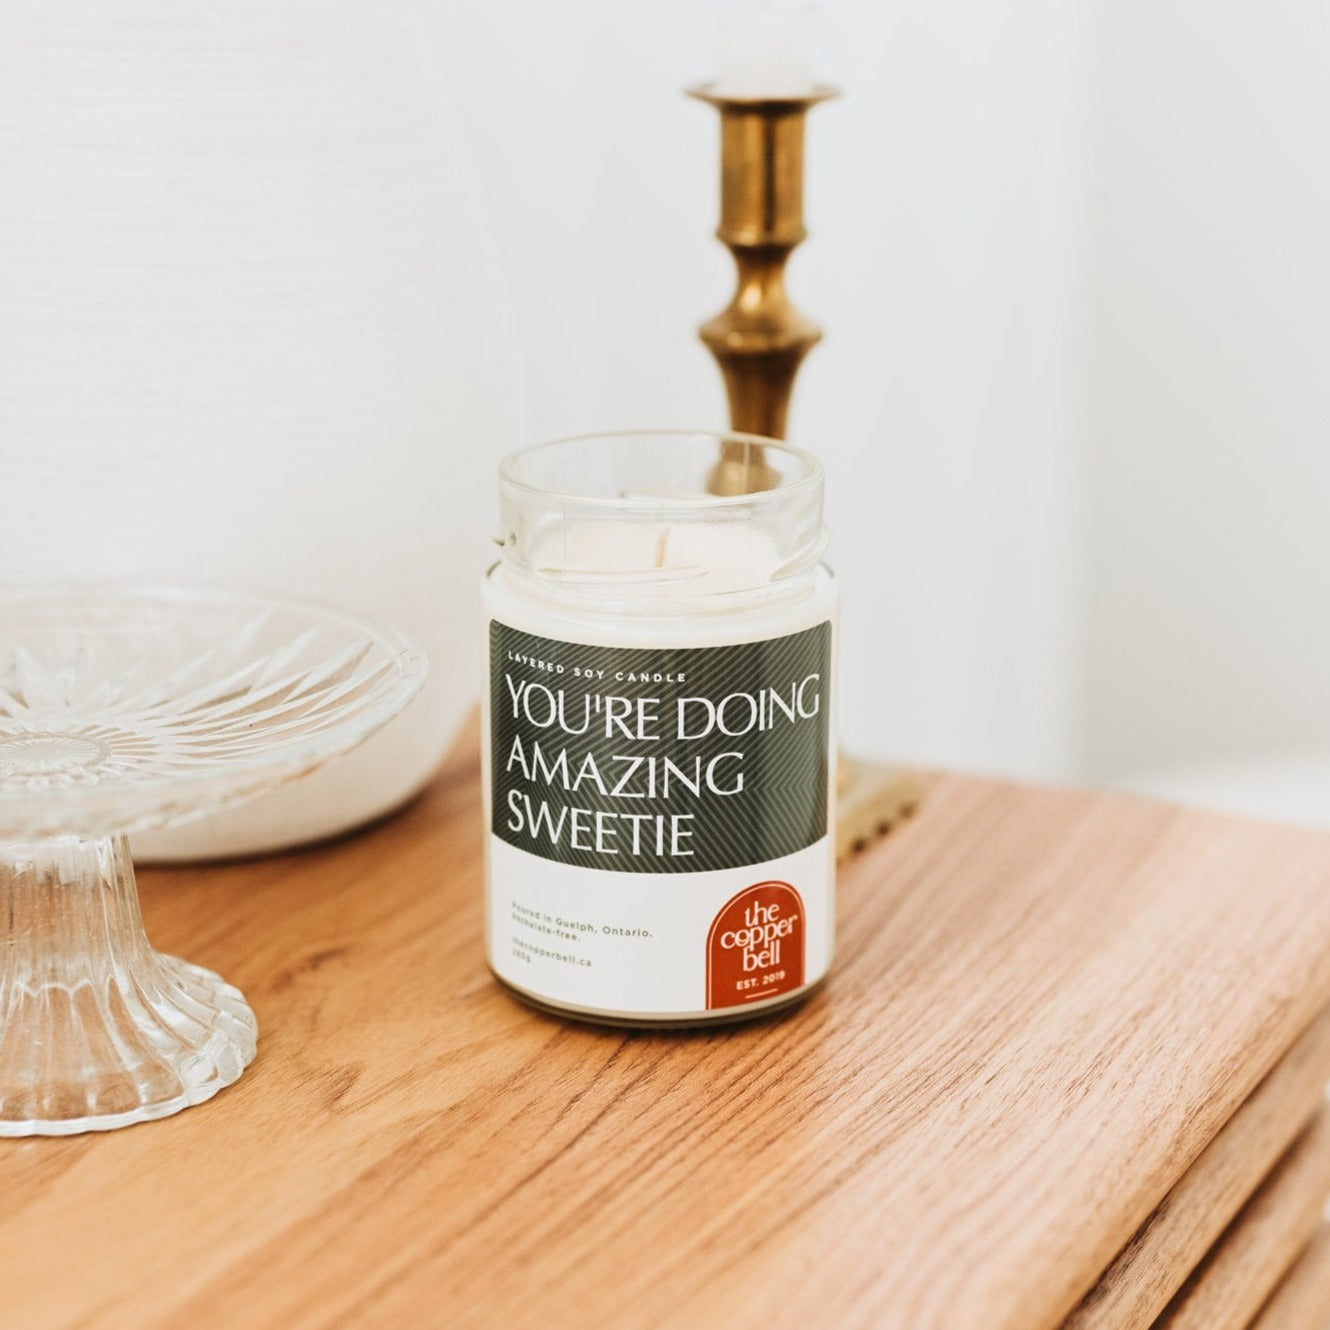 you're doing amazing sweetie. sweet and sincere candle, perfect for gifting to your friends.